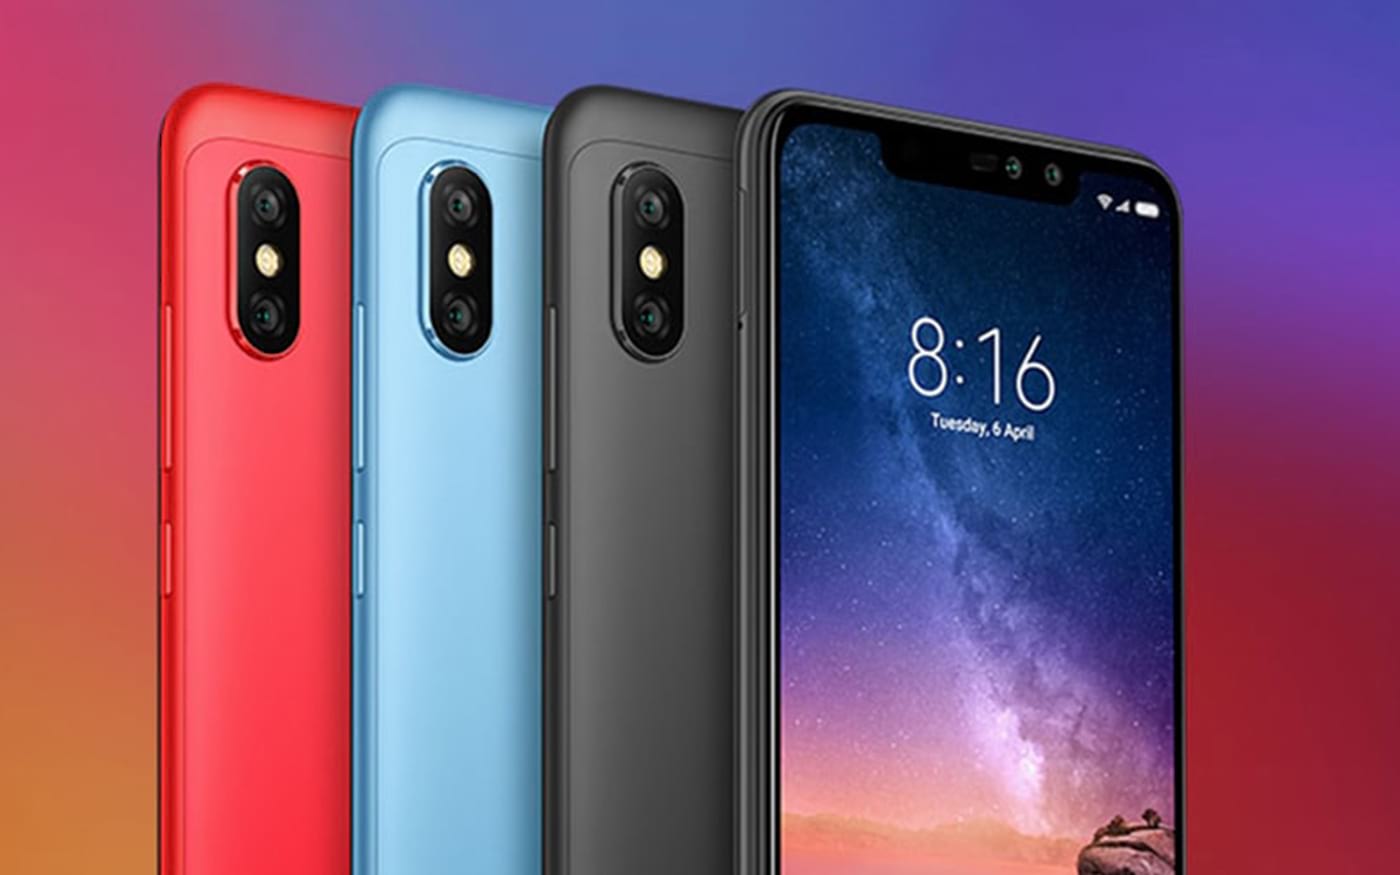 Redmi Note 6 Pro catches fire at a repair center in India